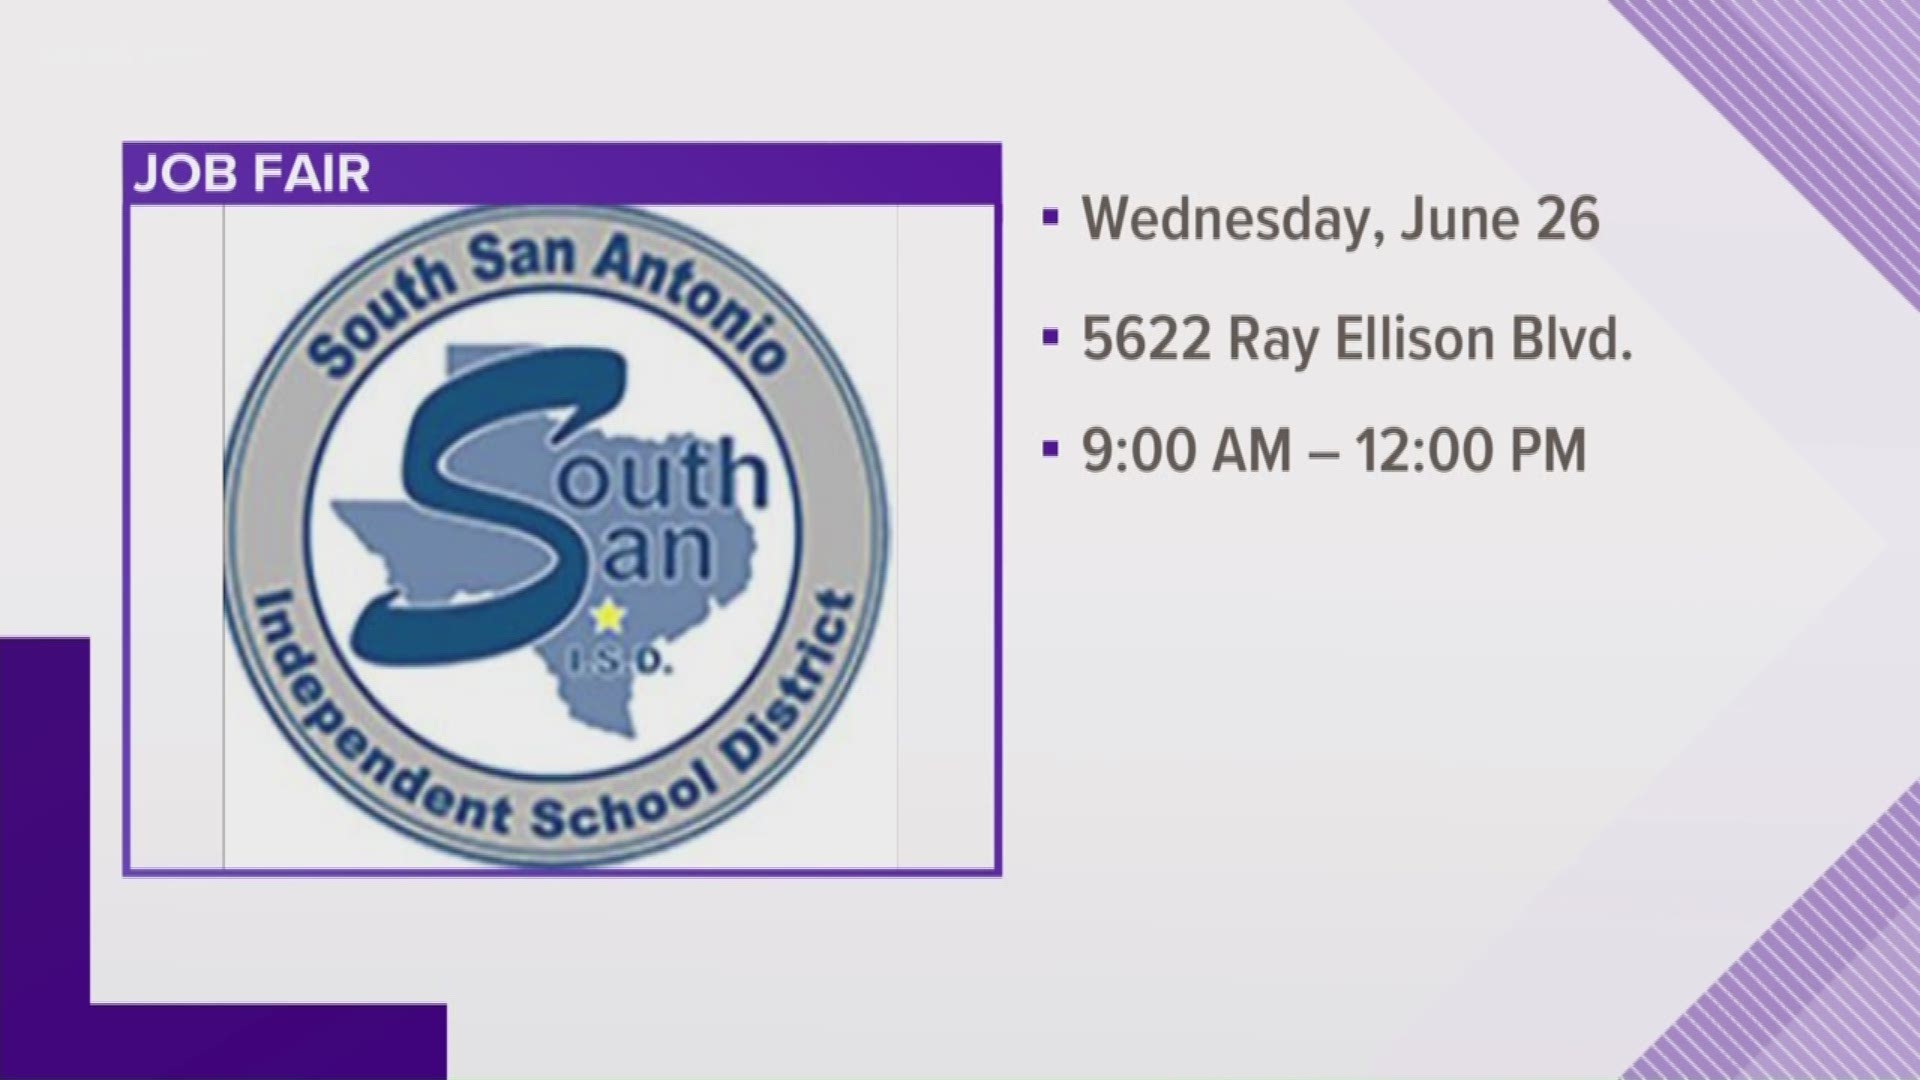 South San ISD is holding an auxiliary job fair on Wednesday June 26 from 9 a.m. to 12 p.m.